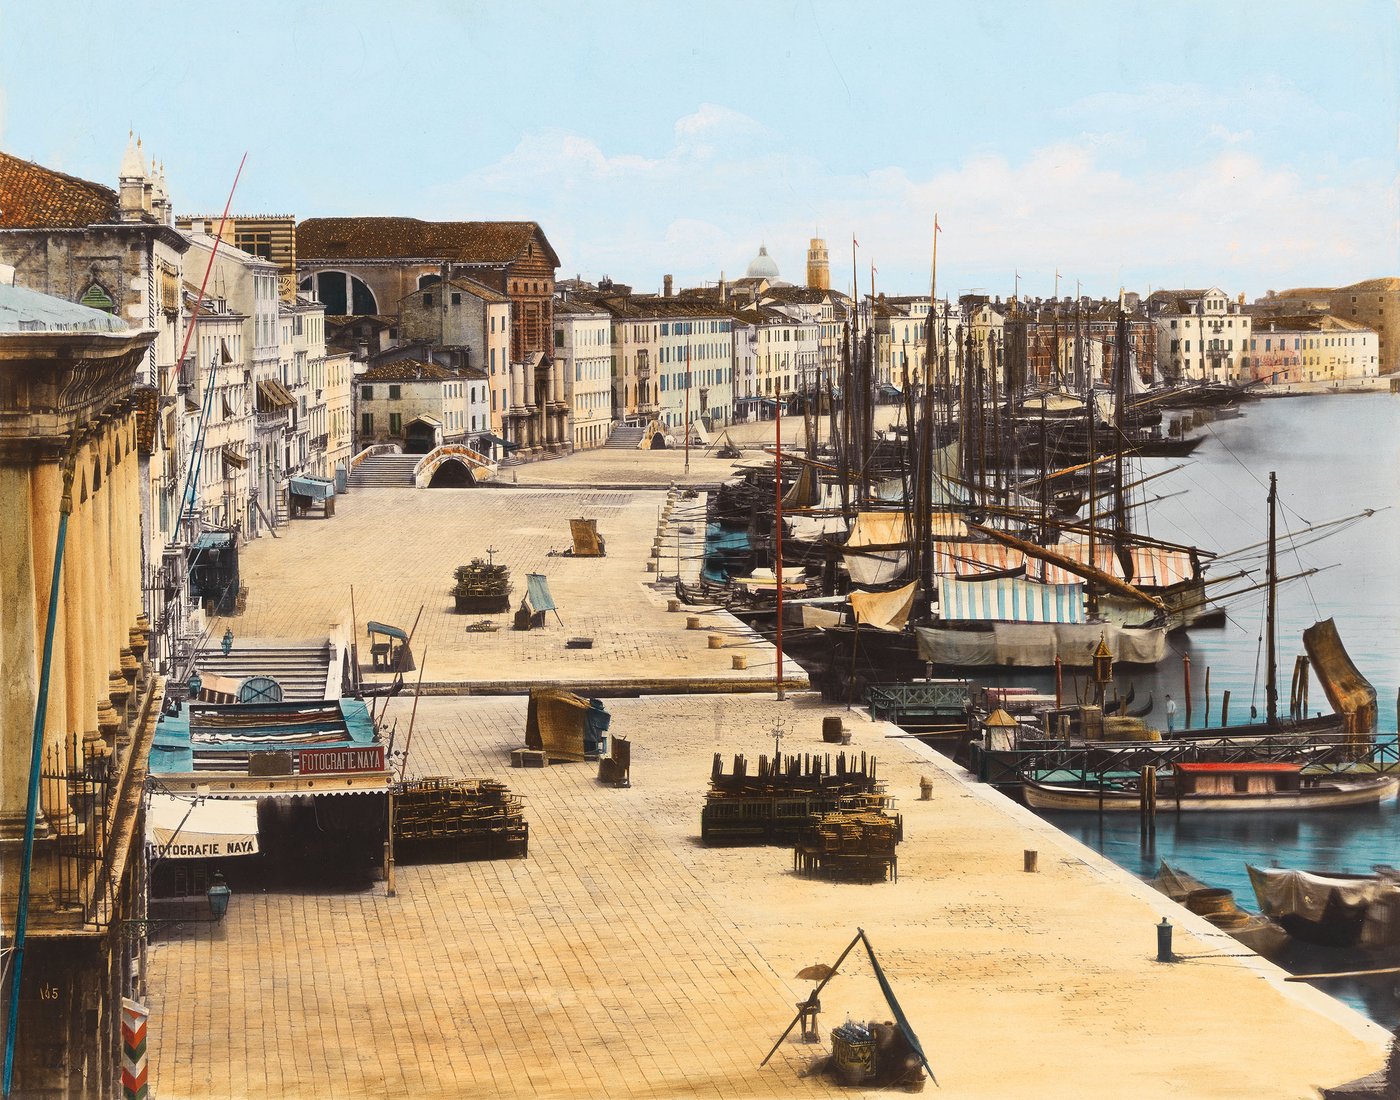 Coloured photo of the waterfront Riva degli Schiavoni in Venice, lined by a row of houses on the left and the lagoon with sailing ships on the right. The photographer's shop can be seen in the left foreground.